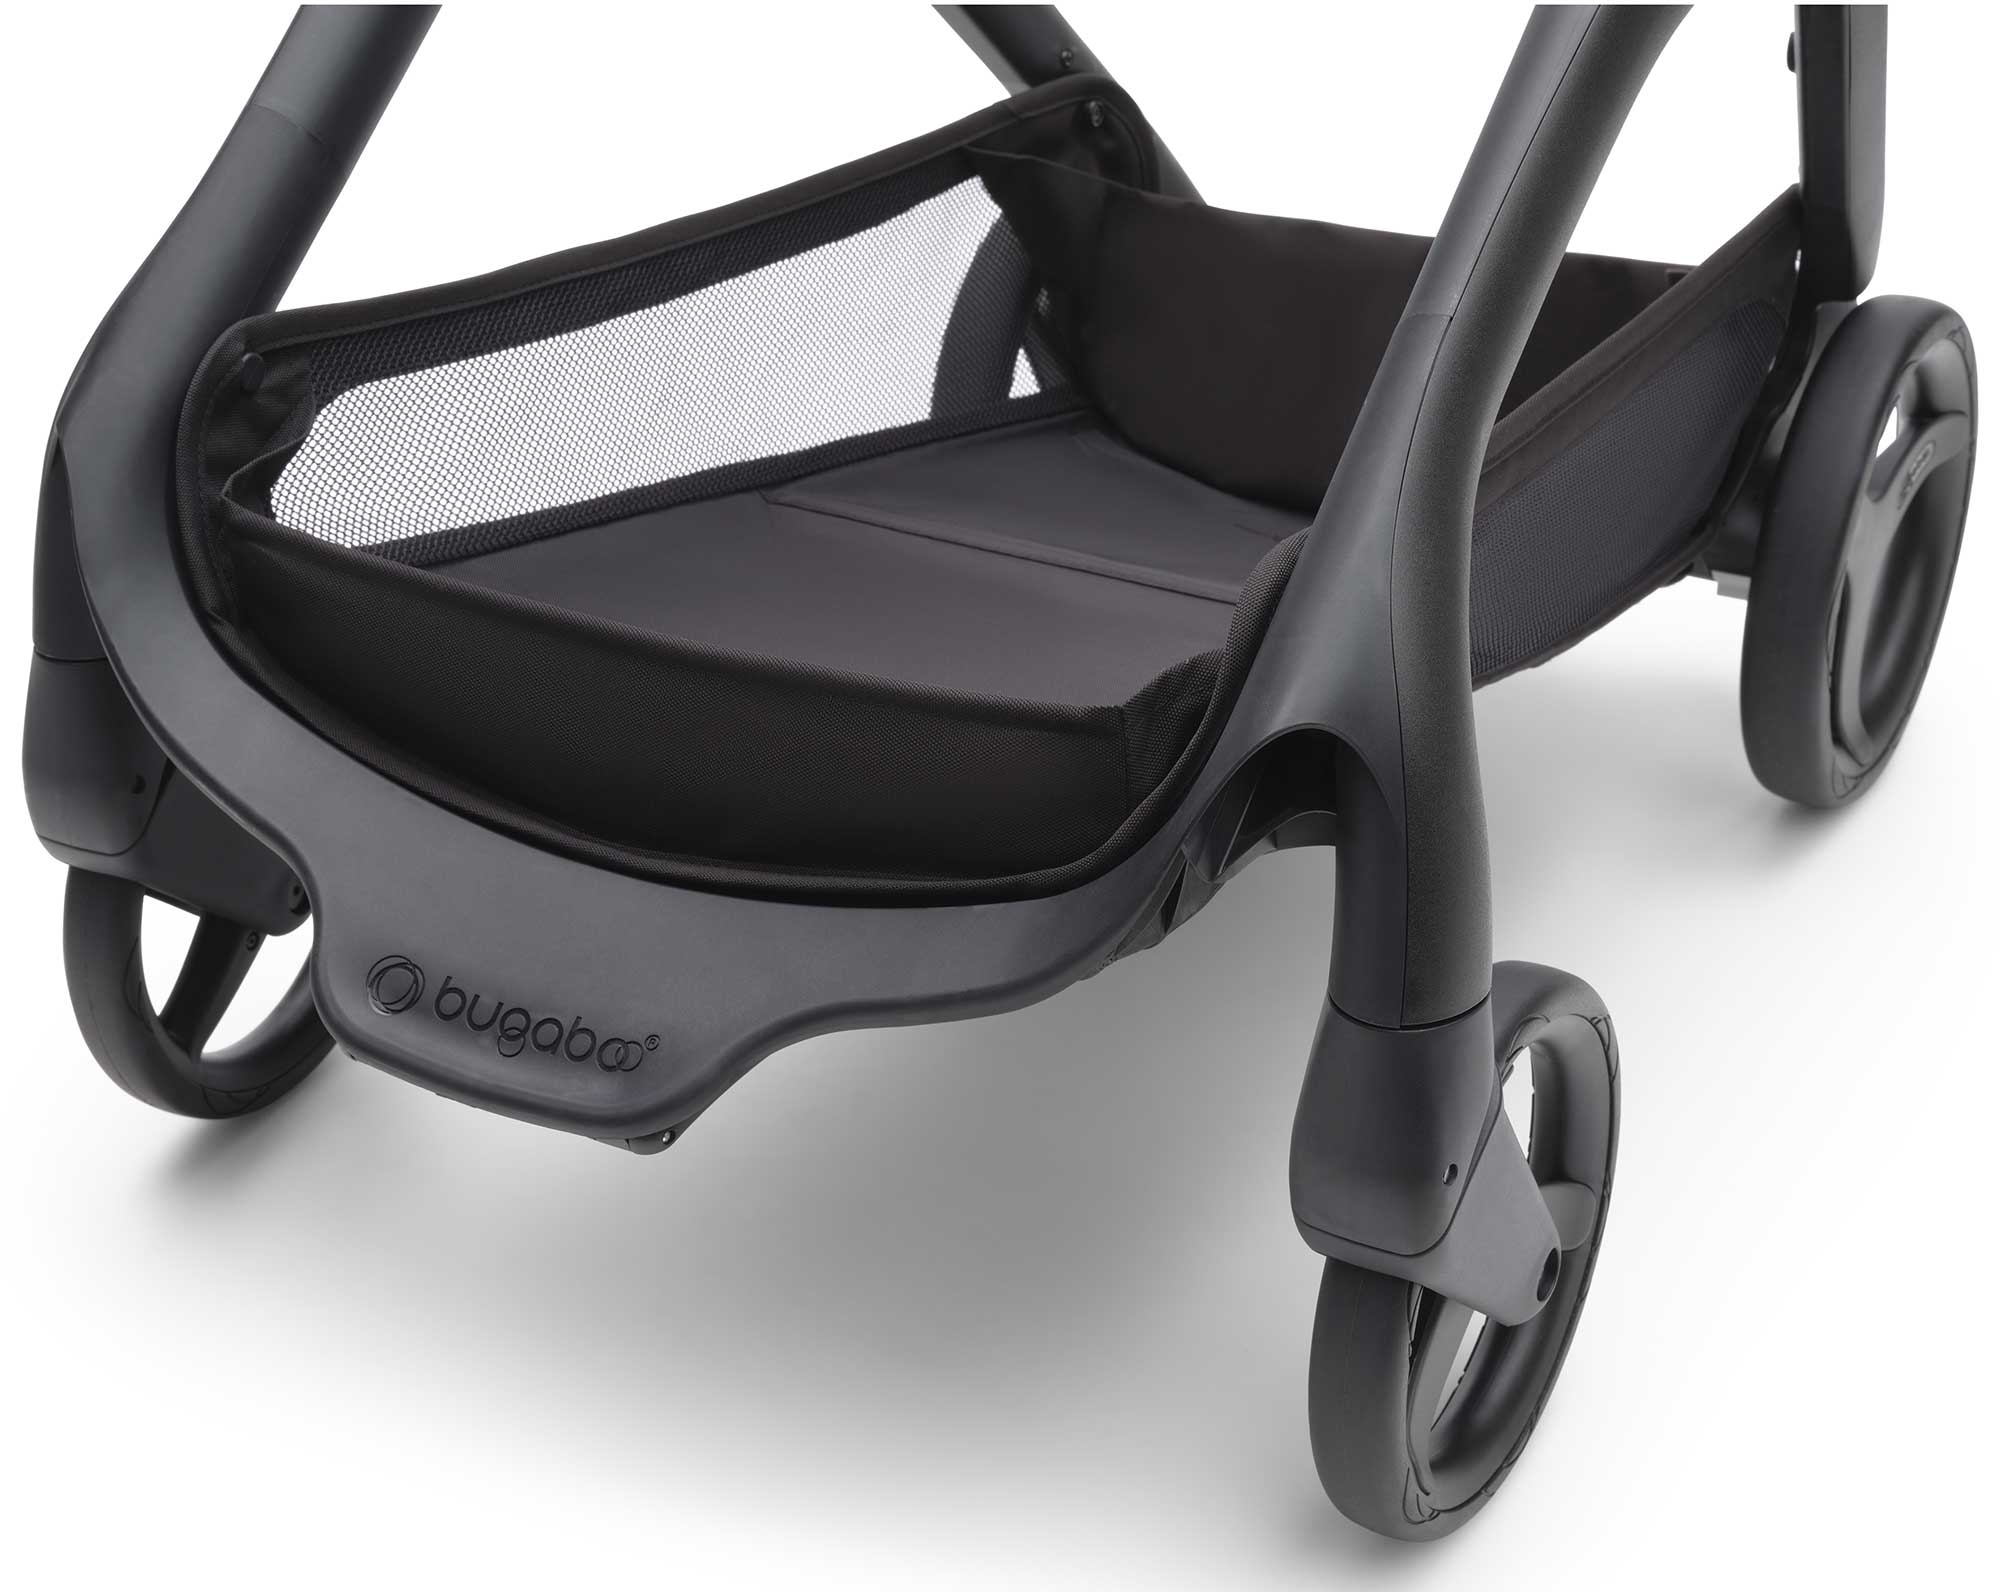 Bugaboo Pushchairs & Buggies Bugaboo Dragonfly Complete Pushchair in Black/Forest Green 100176037